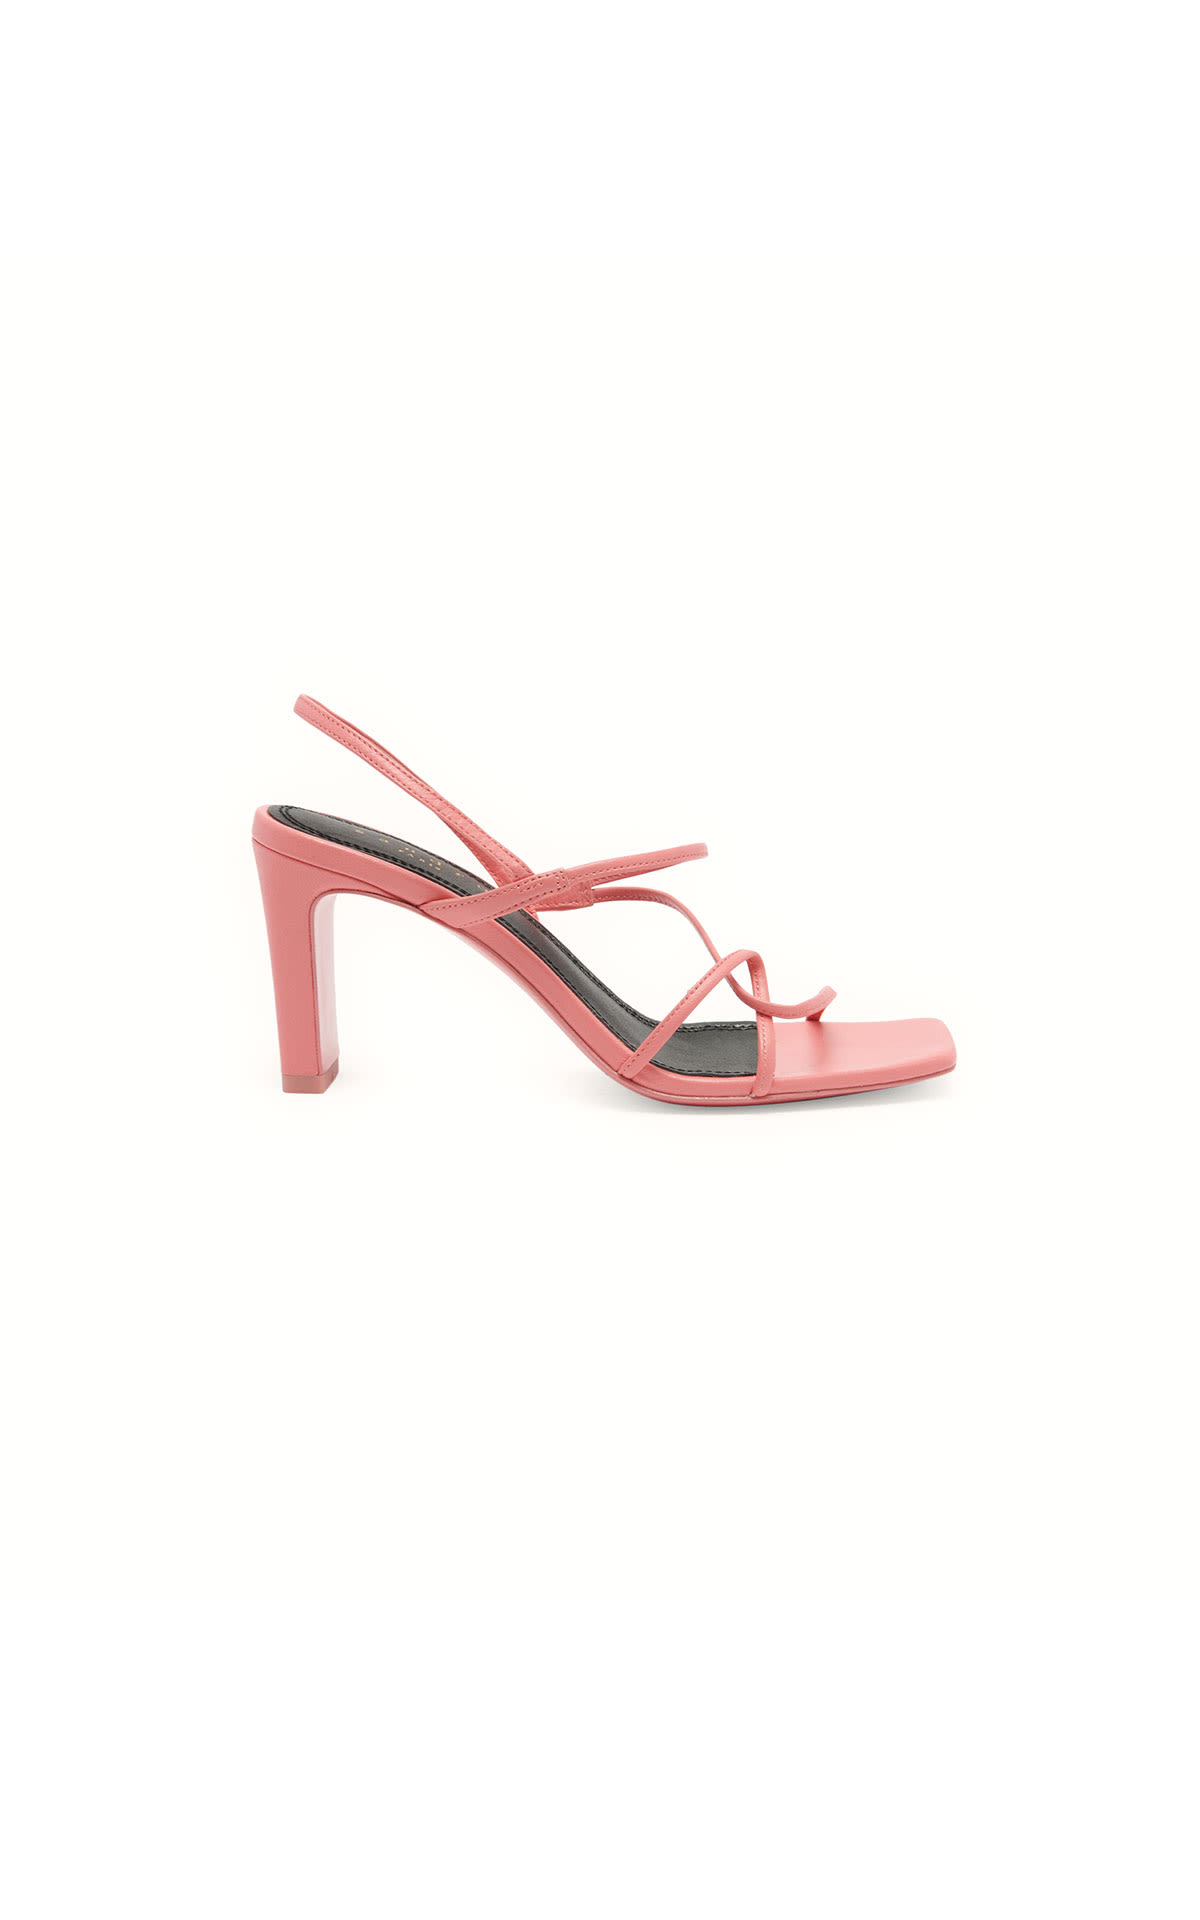 Sandro sandal with wide heel at The Bicester Village Shopping Collection